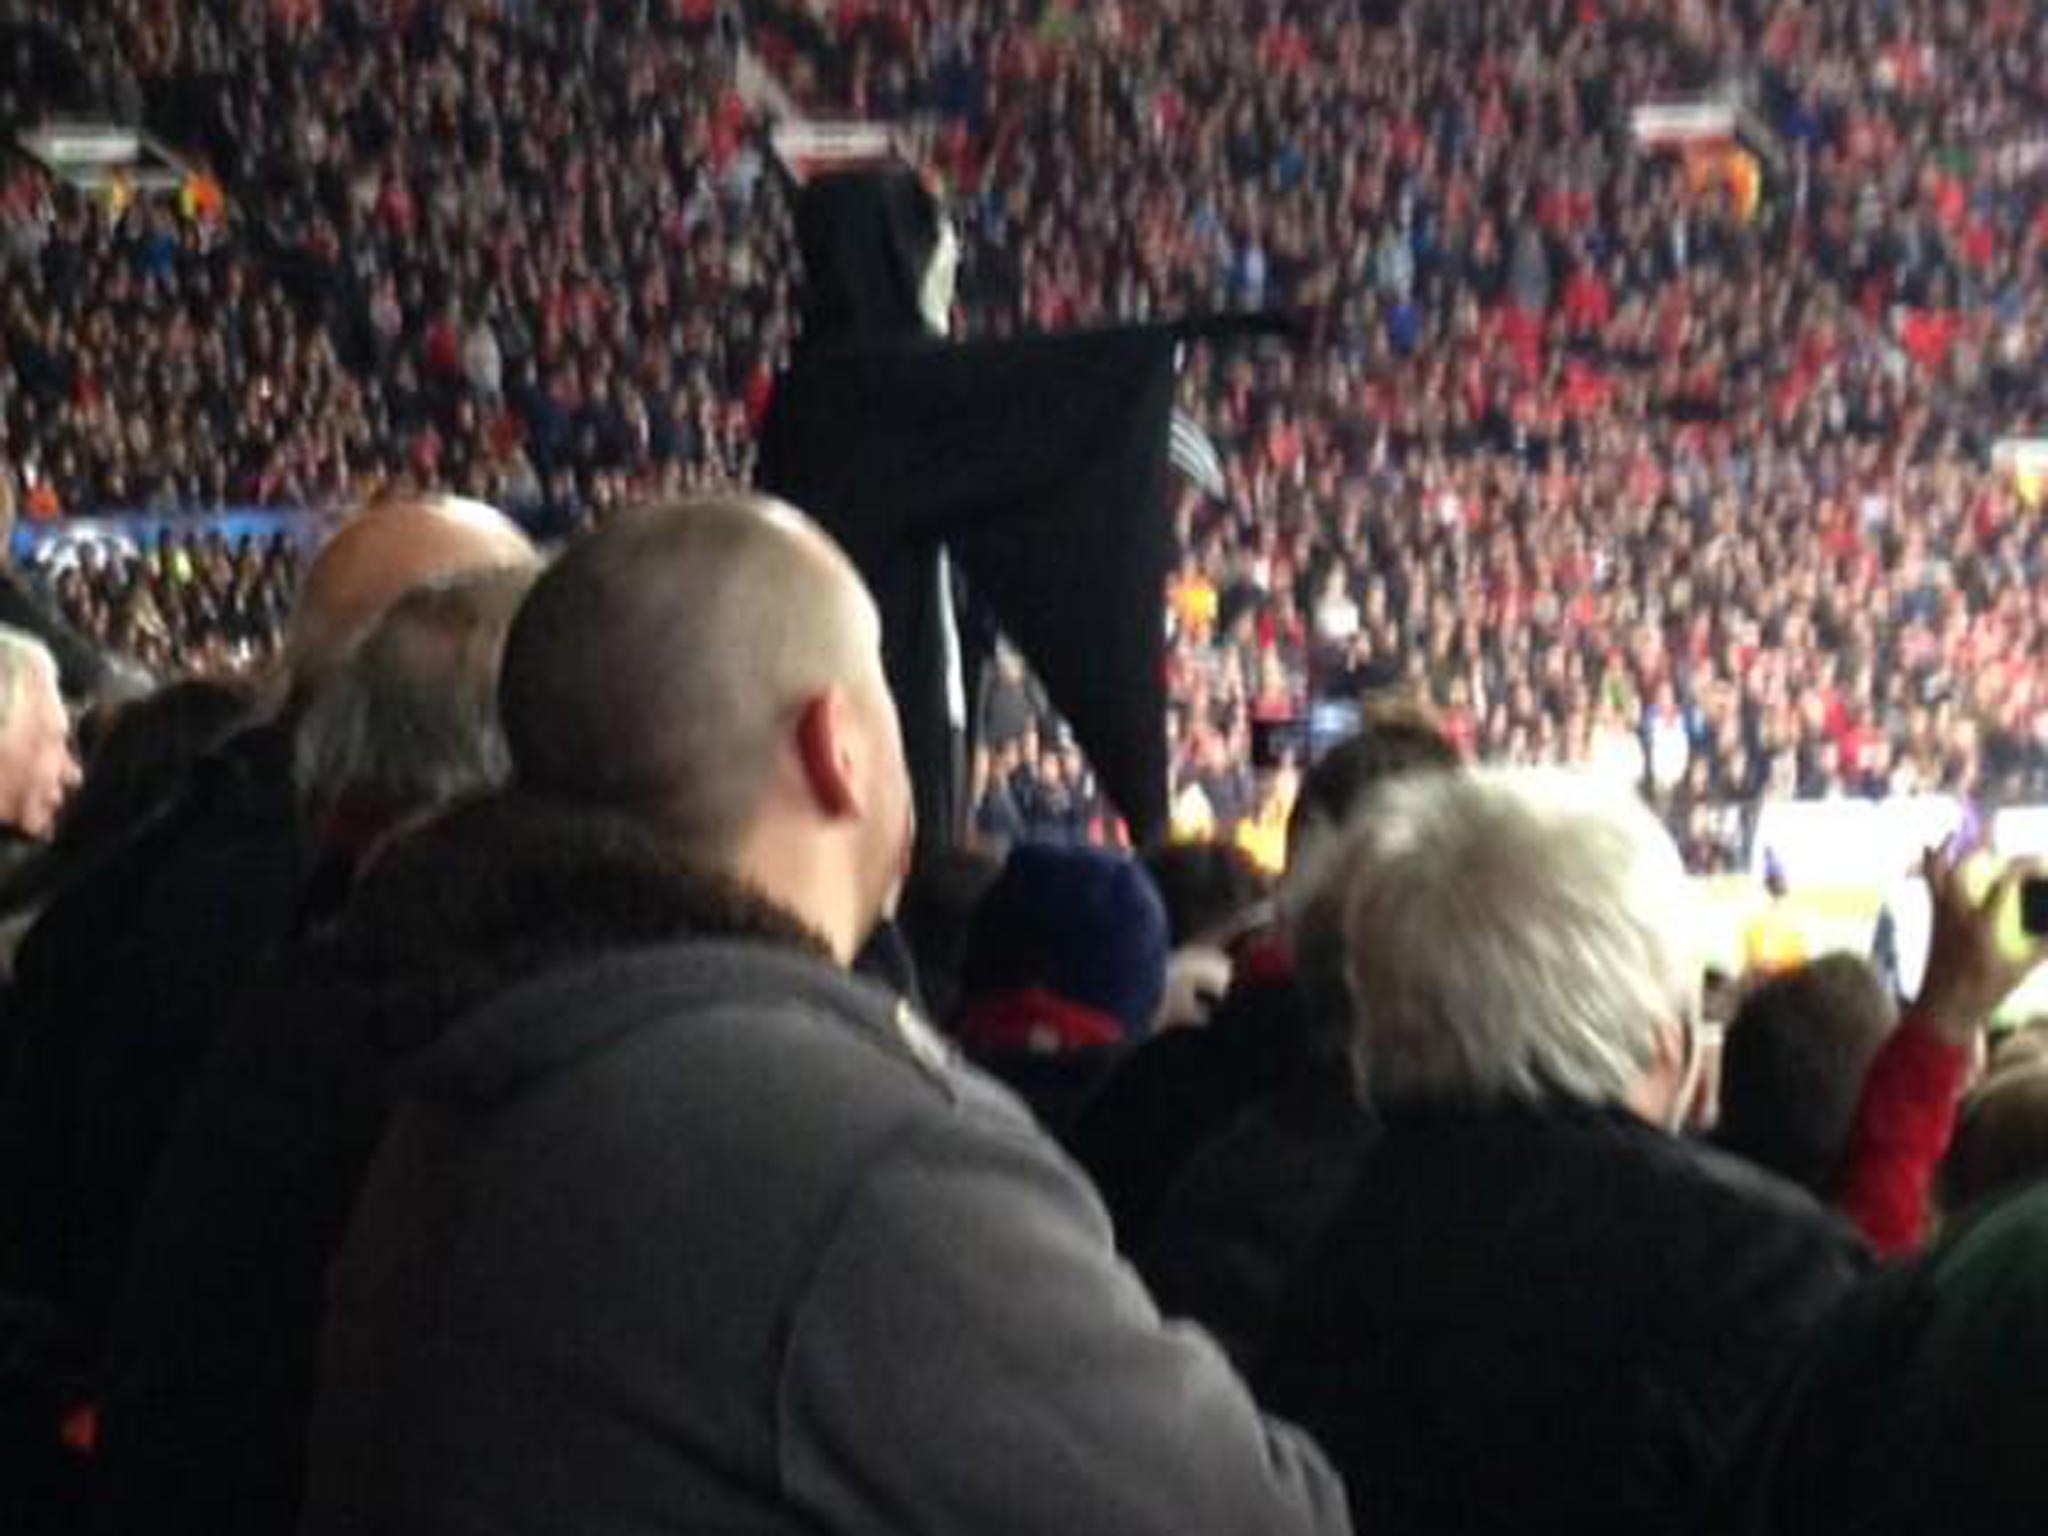 A fan dressed up as the Grim Reaper during Manchester United's win over Olympiakos, shouting at David Moyes "Moyes, I'm coming to get you!"